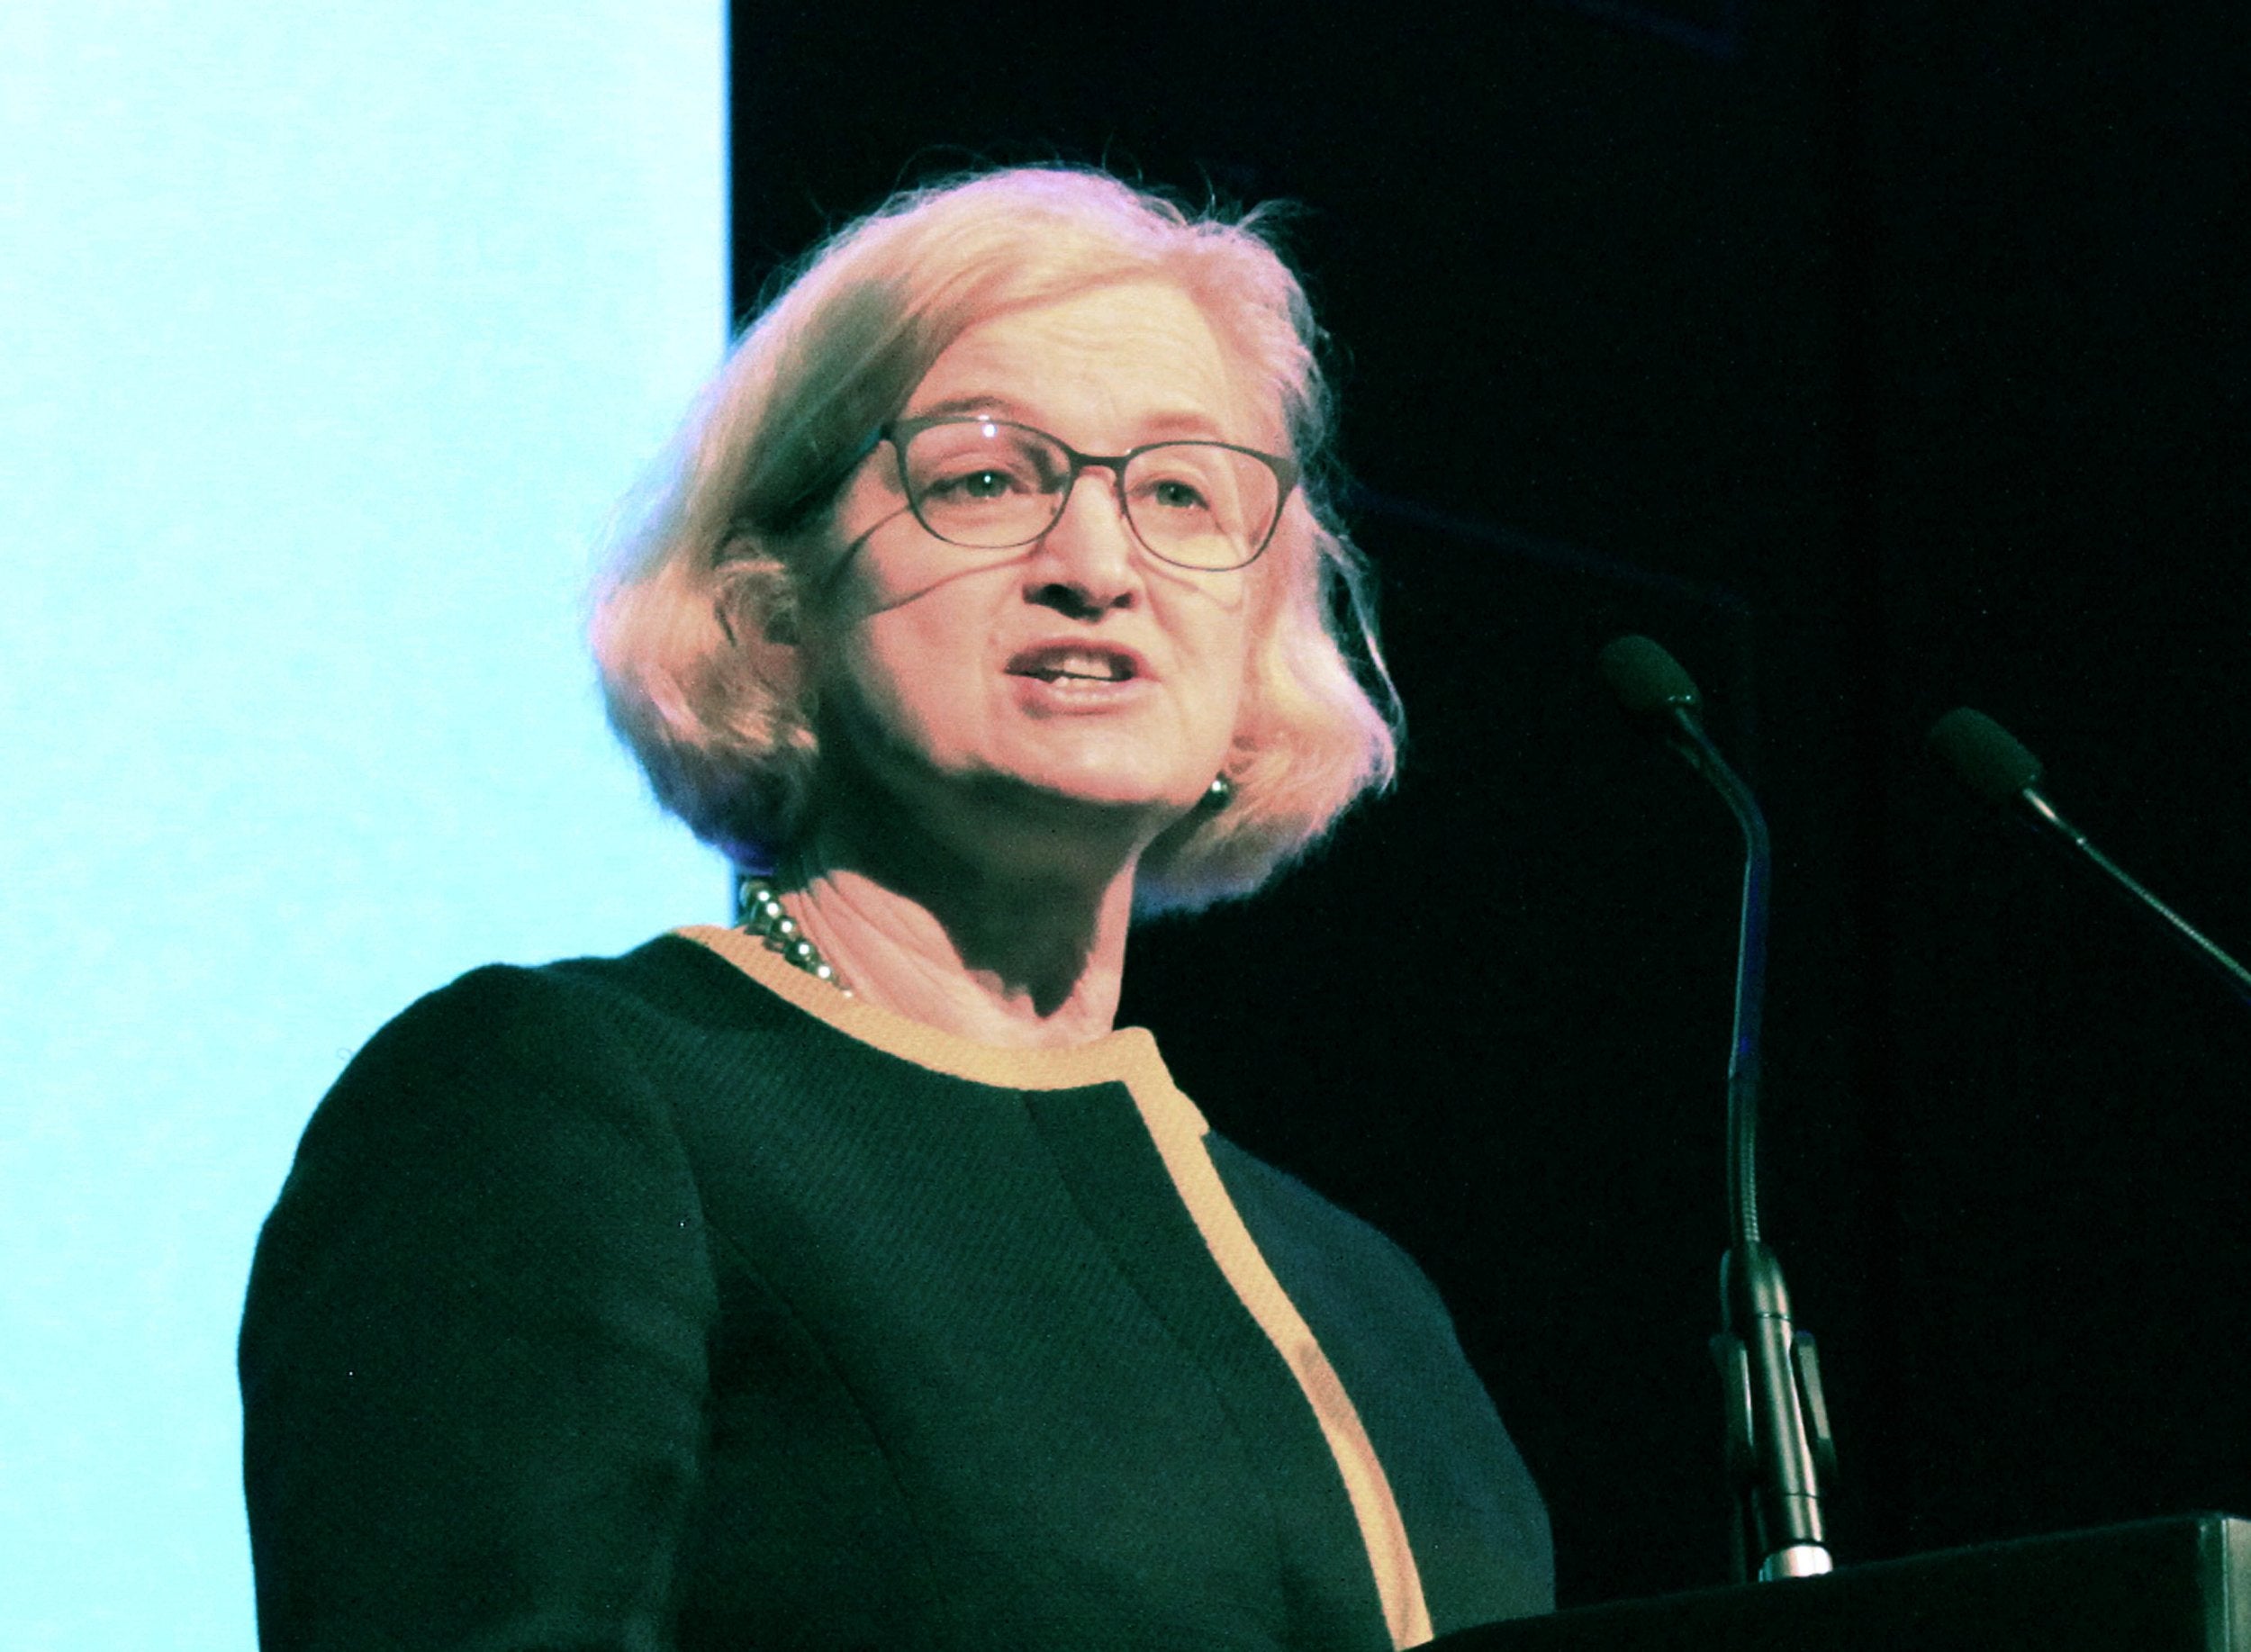 Pre-school Learning Alliance of Ofsted chief inspector Amanda Spielman